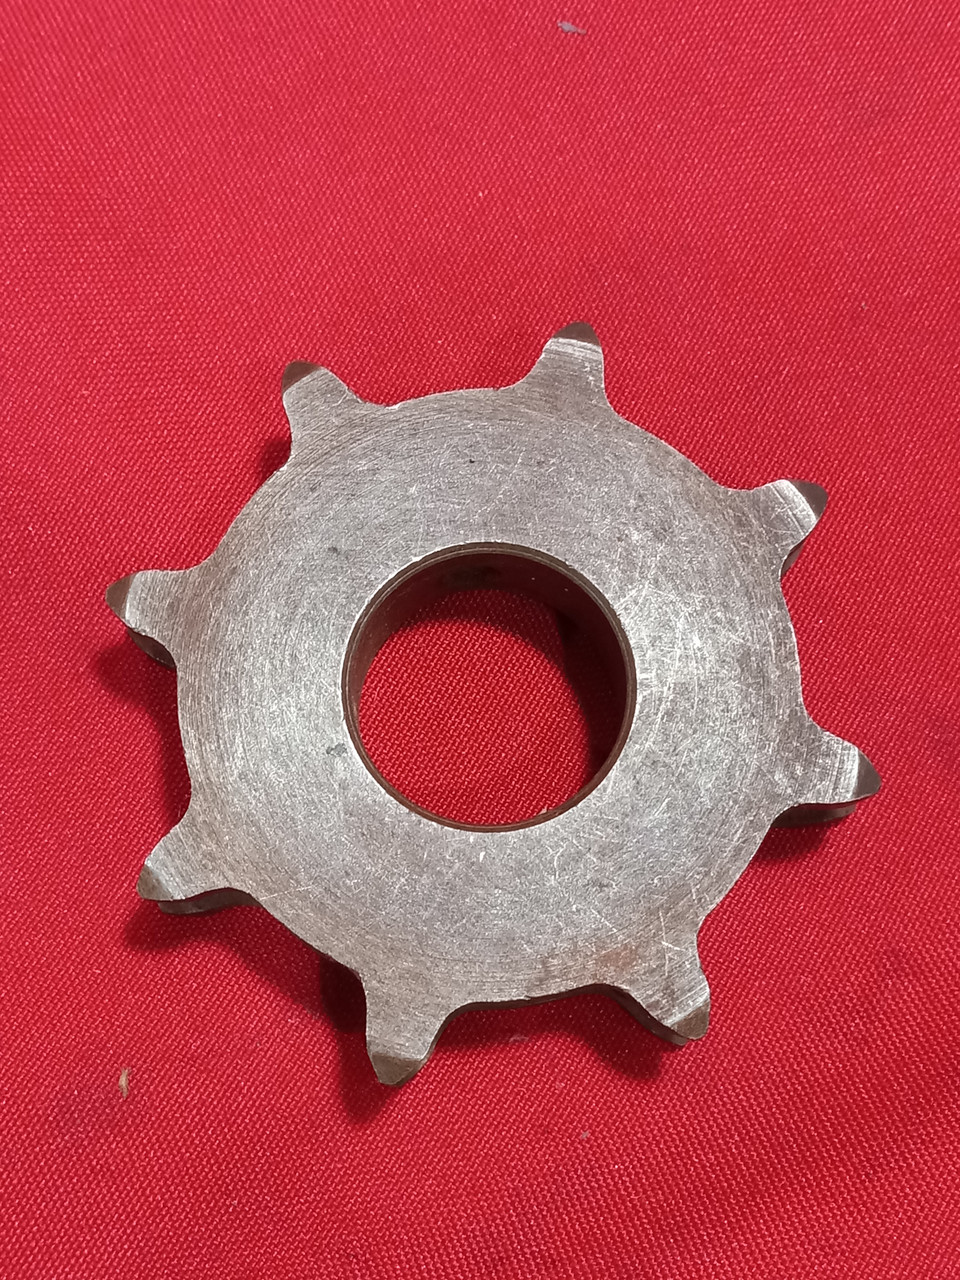 Martin 80A8-1" Double Pitch Sprocket 